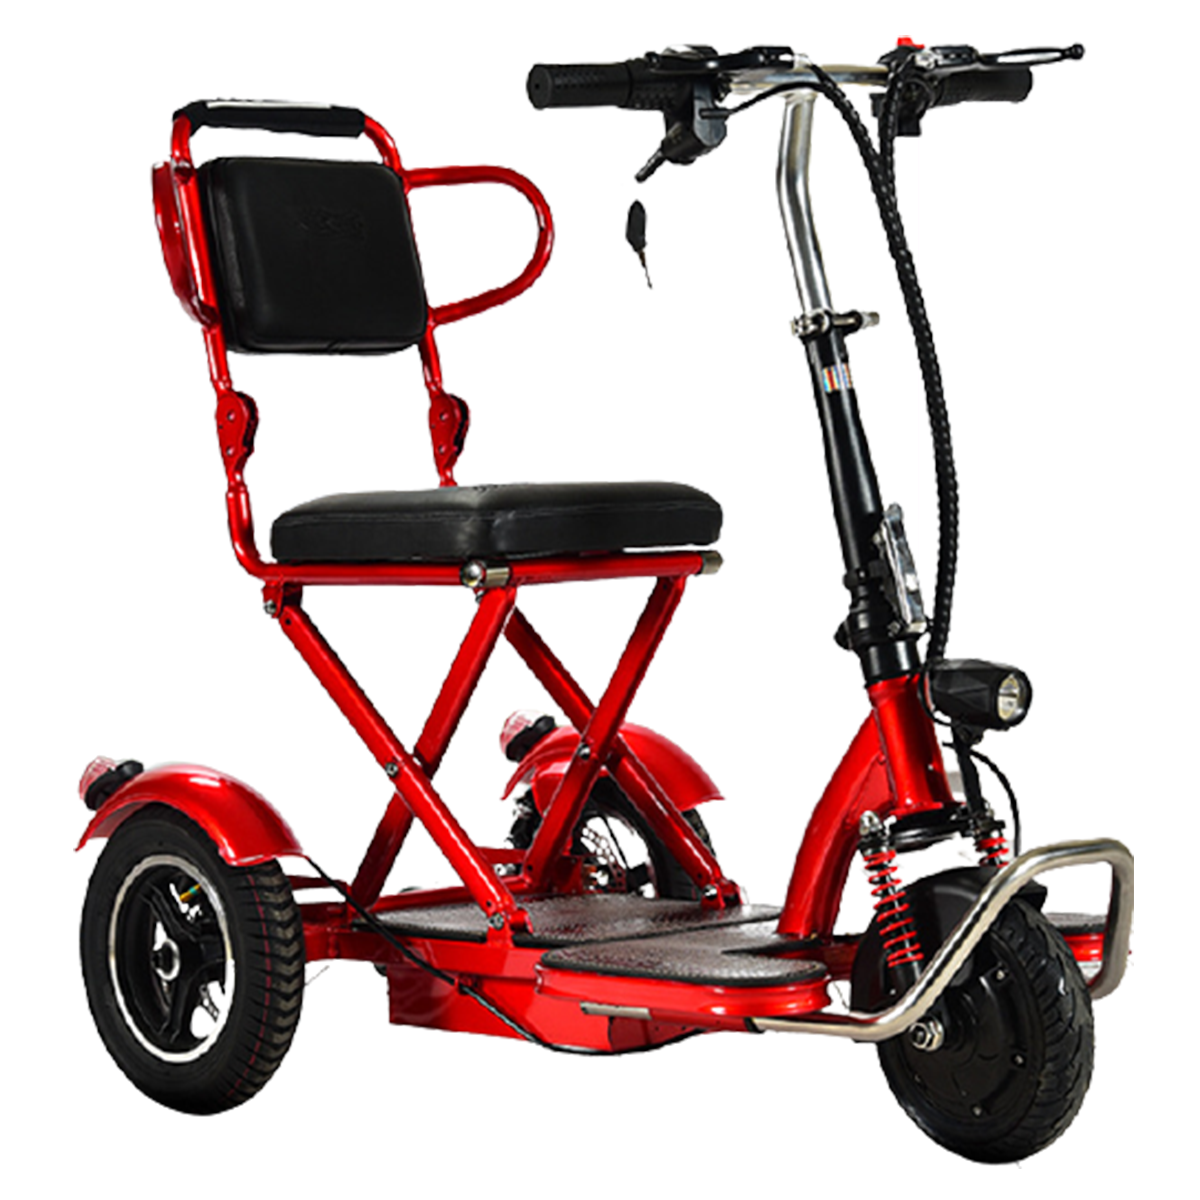 V3 Electric folding mobility scooter for Elderly or Disabled - Red